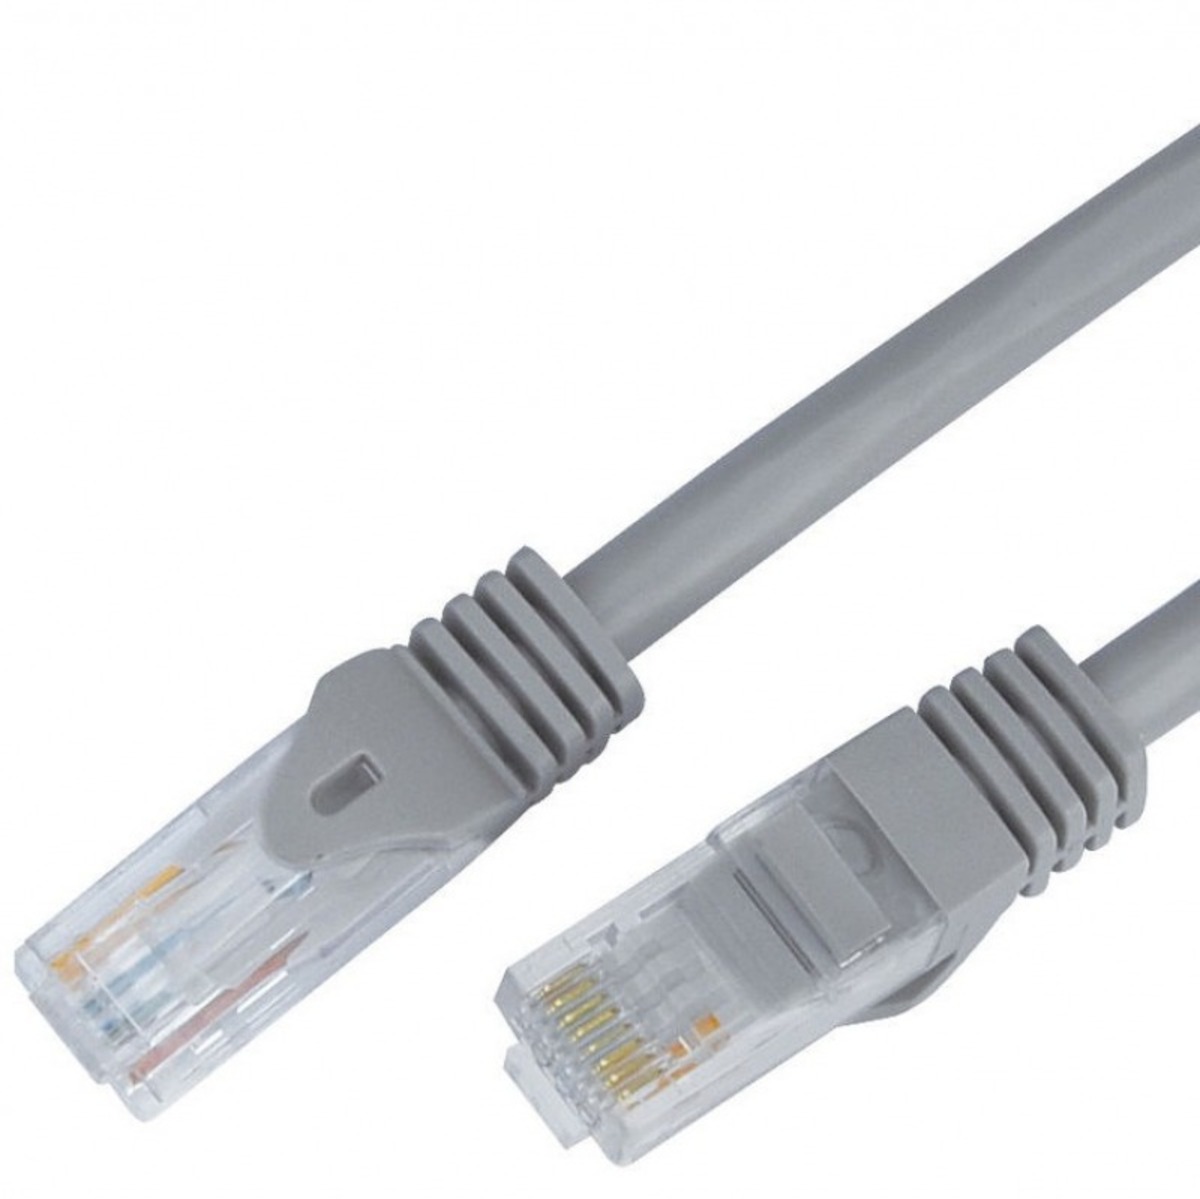 Iends Cat 6 Patch Cord Network Cable Ethernet Patch Cord Cable Grey 2 Meter CA2190